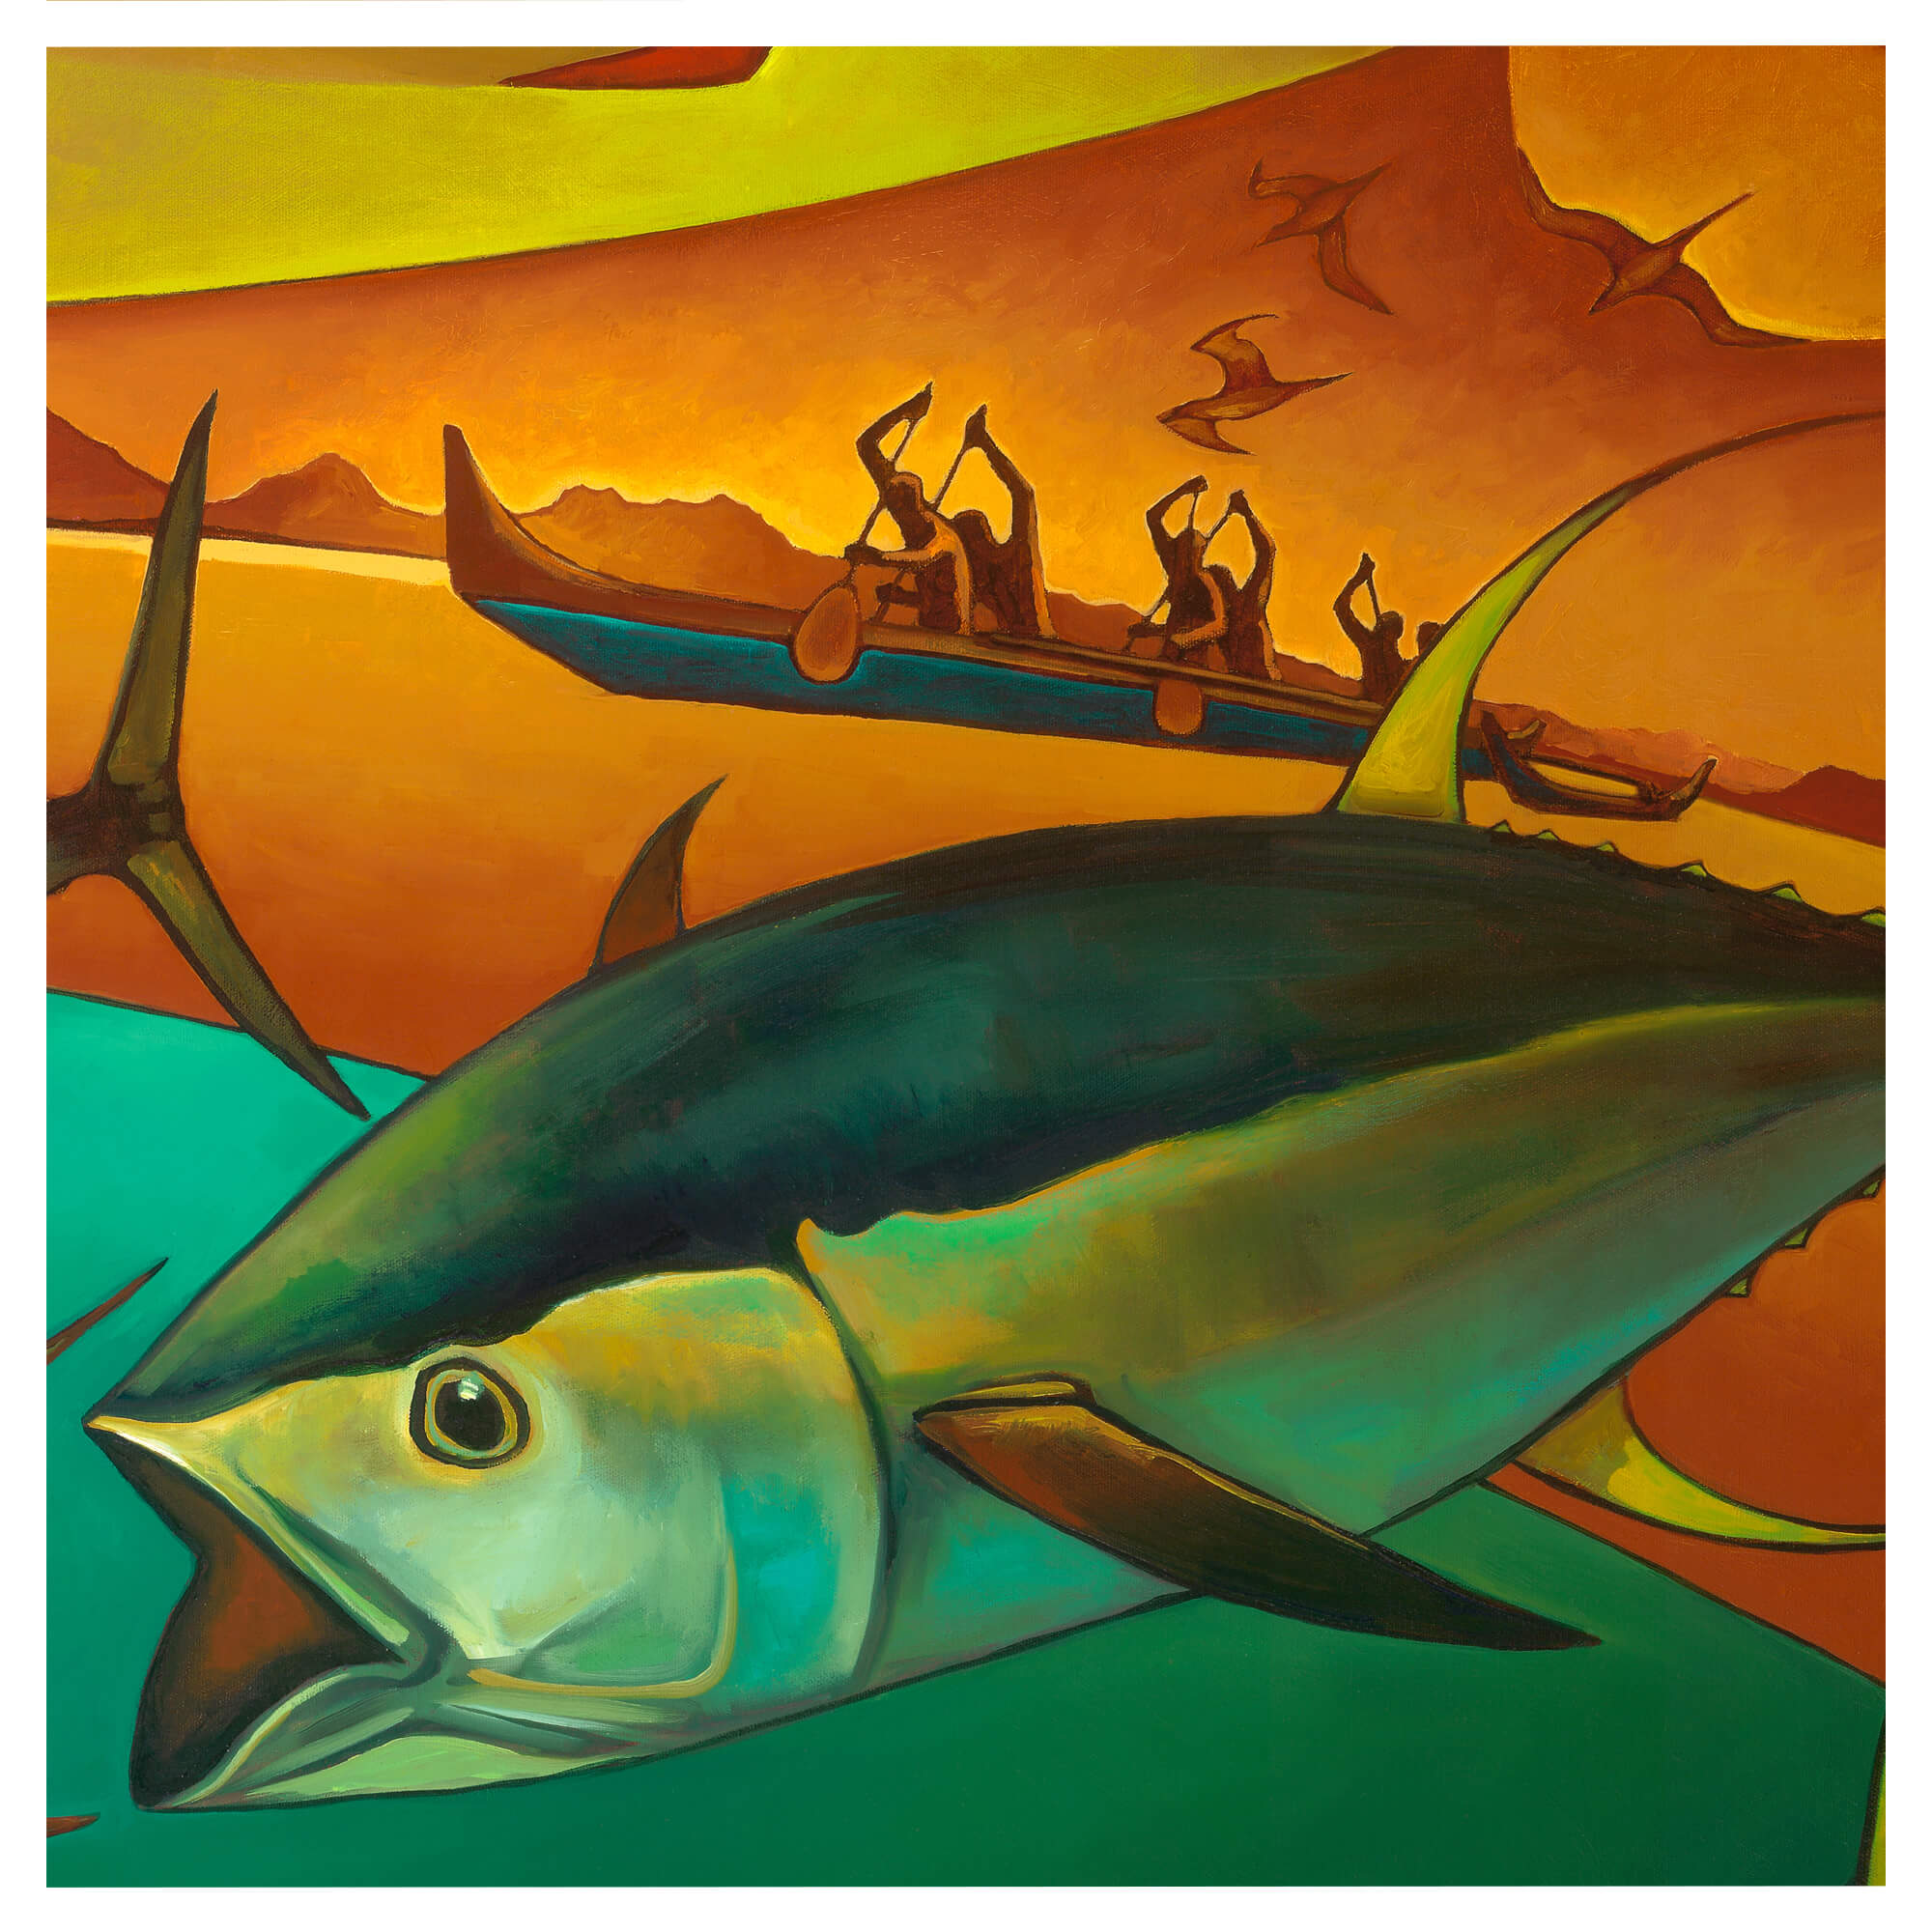 A large tuna fish, flying birds and men paddling in a boat by Hawaii artist Colin redican